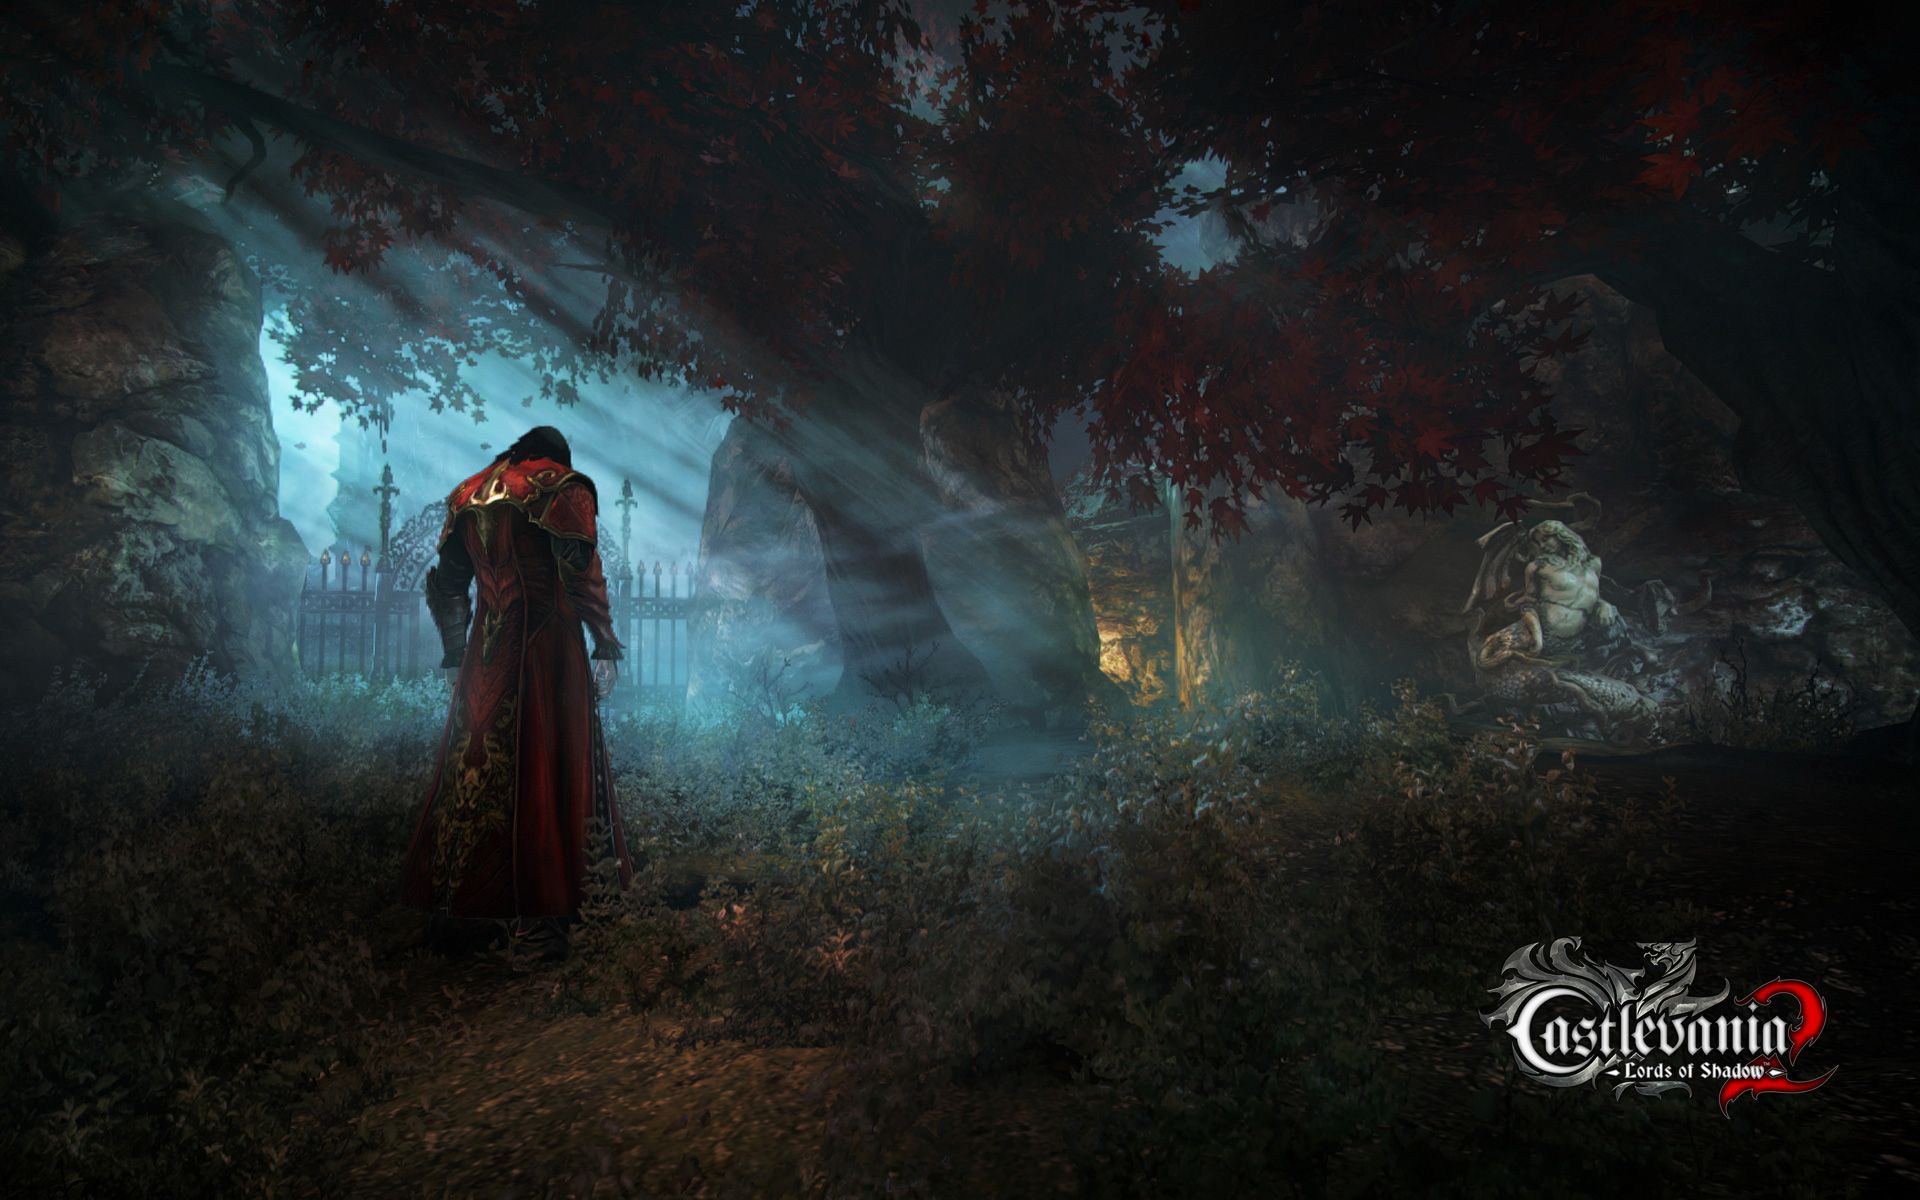 Free download Castlevania Lords of Shadow 2 HD wallpaper 1 2 [1920x1200] for your Desktop, Mobile & Tablet. Explore Castlevania Lords of Shadow Wallpaper. Castlevania Wallpaper 1920x Castlevania HD Wallpaper